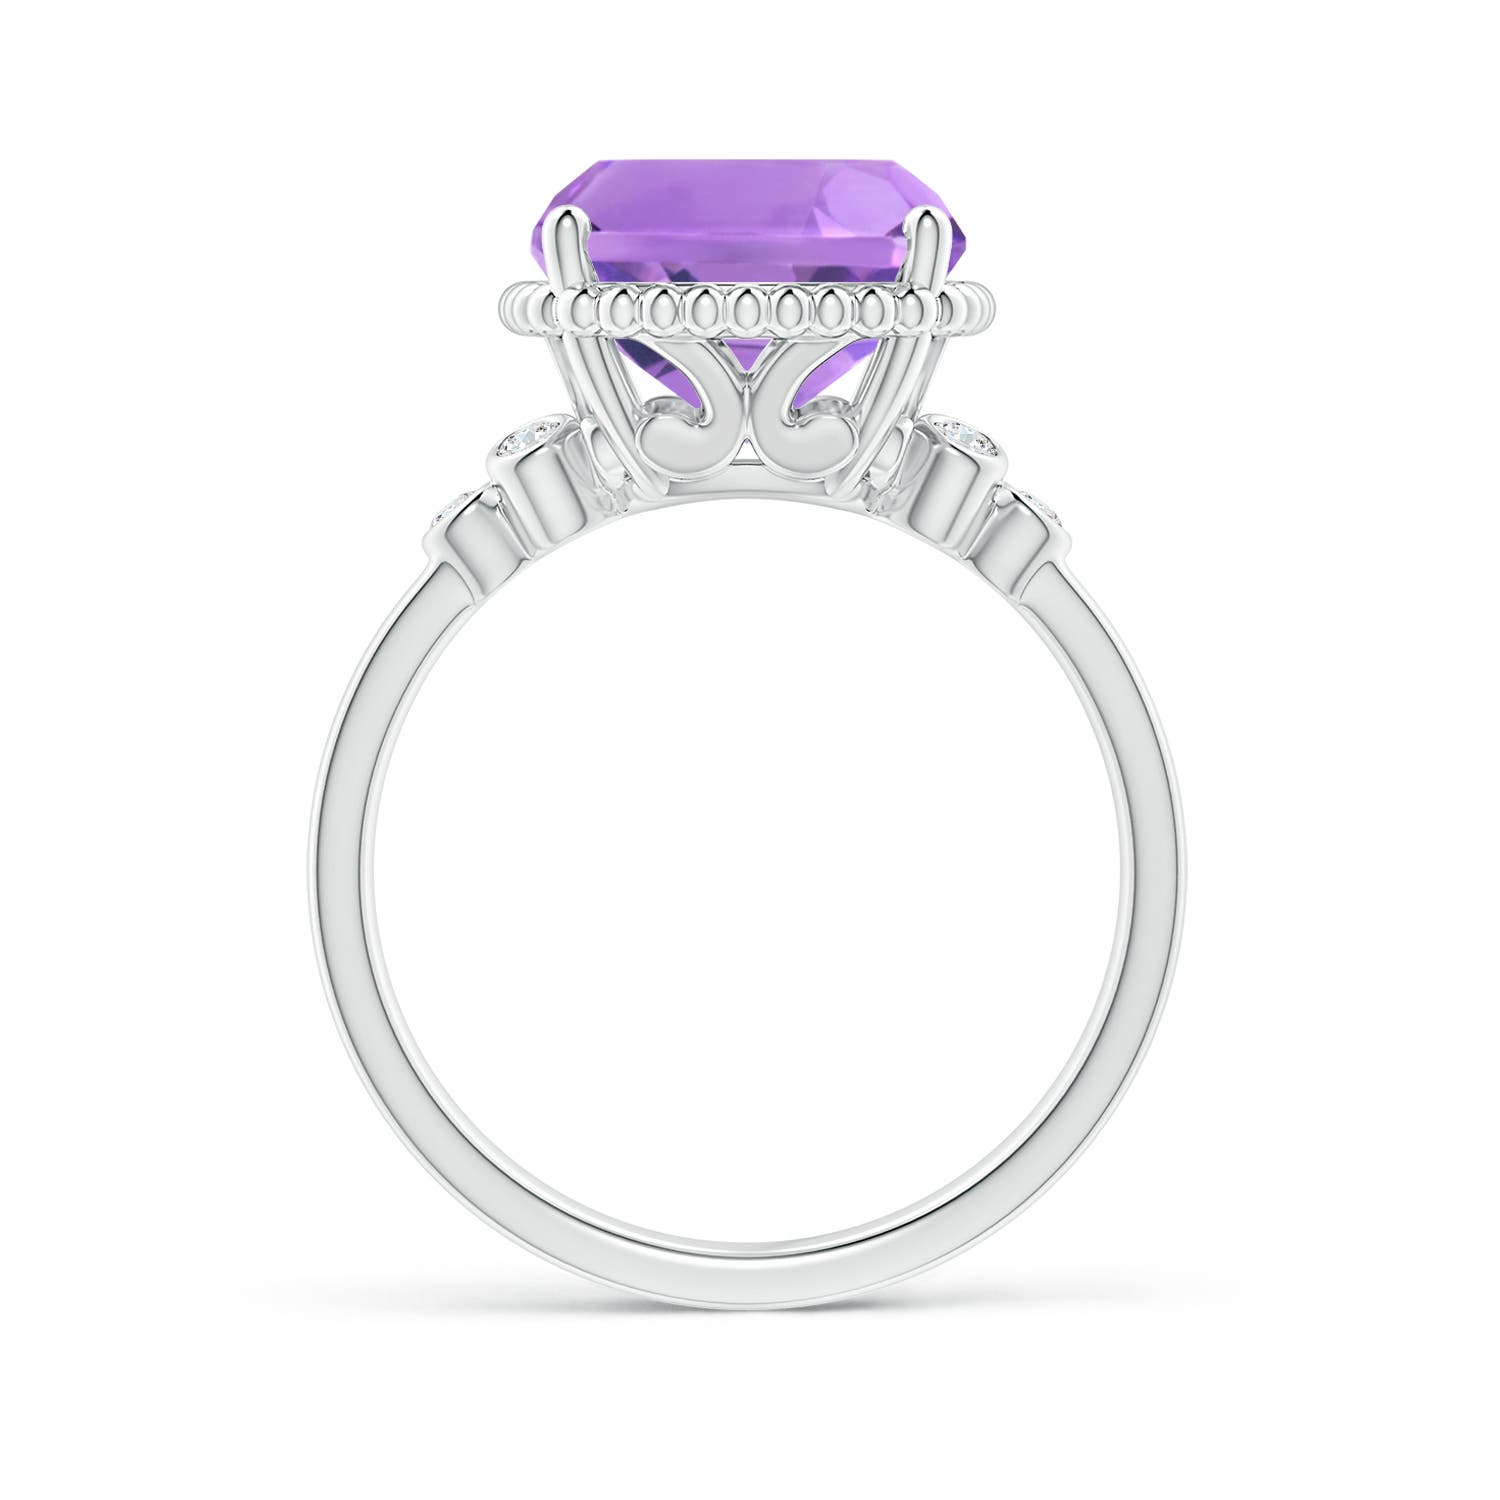 A - Amethyst / 4.71 CT / 14 KT White Gold